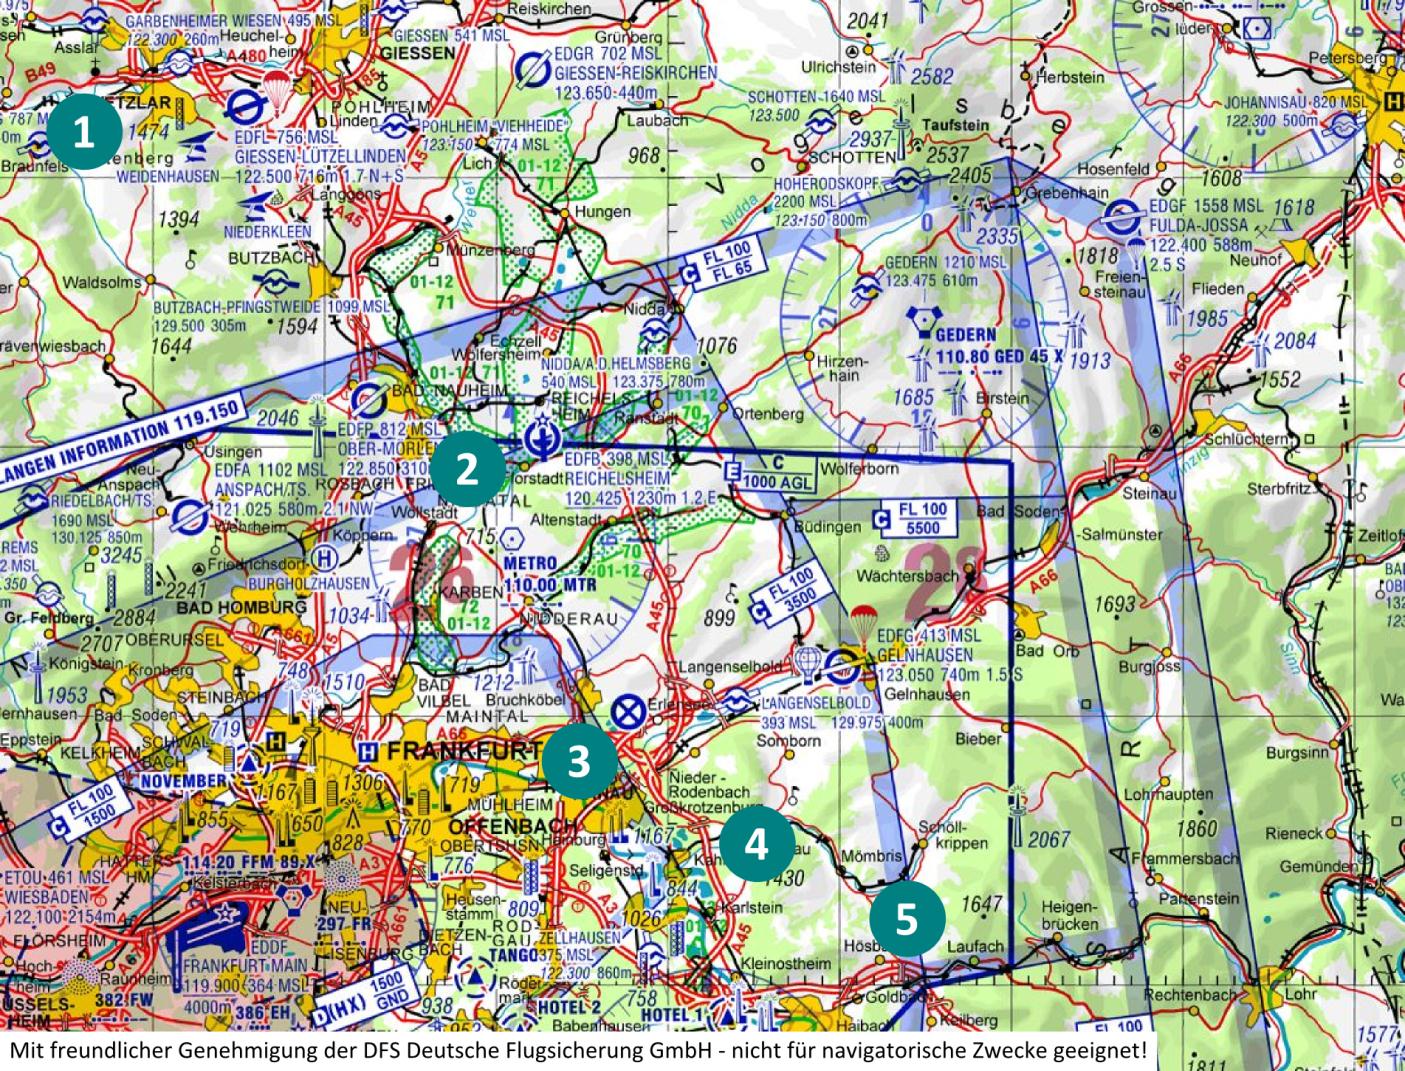 800 A IM DEBZF, PA 28, VFR, abeam Wetzlar in 4.800 feet, request crossing airspace C via Metro- and Charlie-VOR DZF, Squawk 5422 and contact Langen Radar on 120.800 L DZF, Squawk 5422, 120.